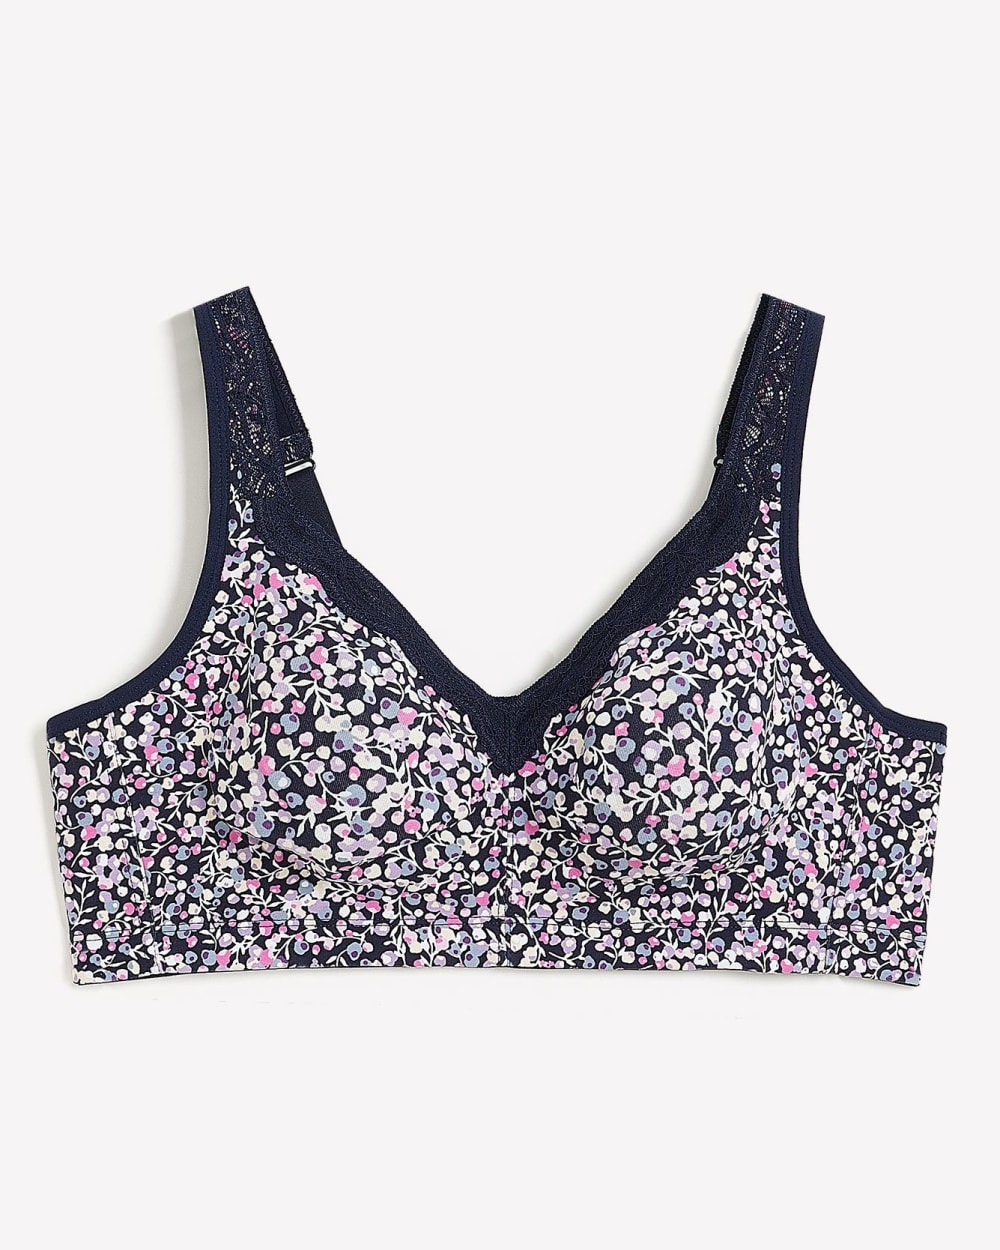 Sports bra molded cups wireless High Support berry-black patterned